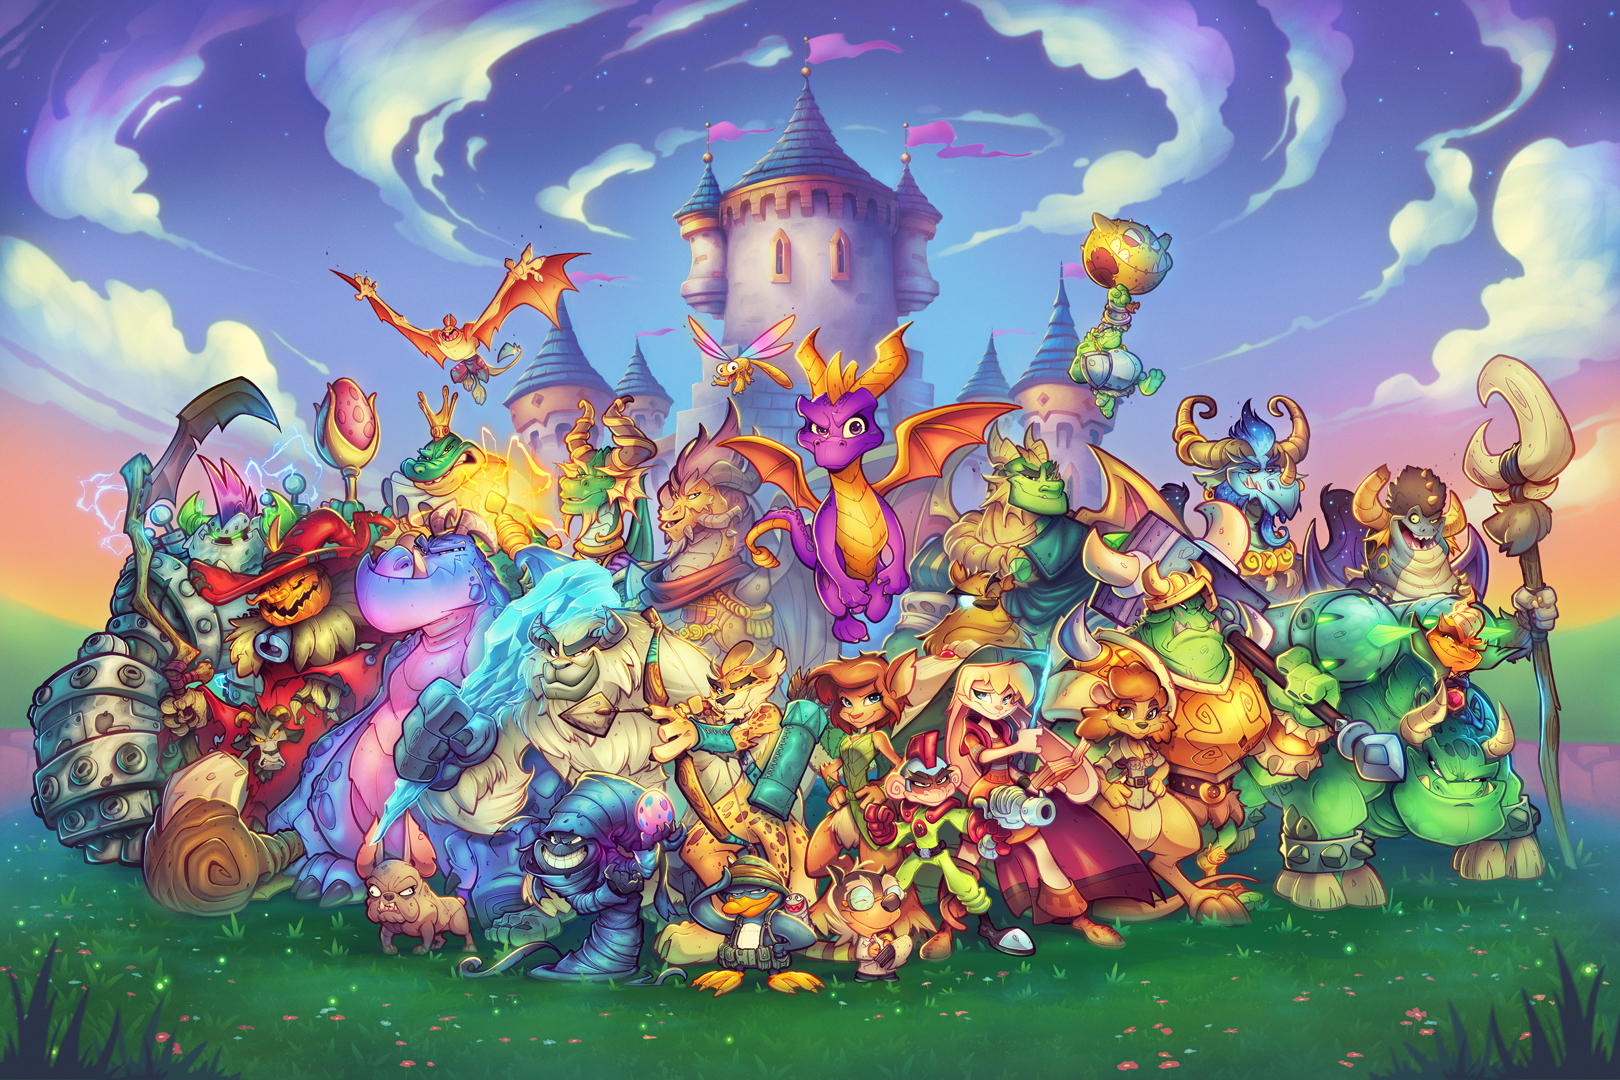 spyro-reignited-trilogy-update-required-to-play-full-collection